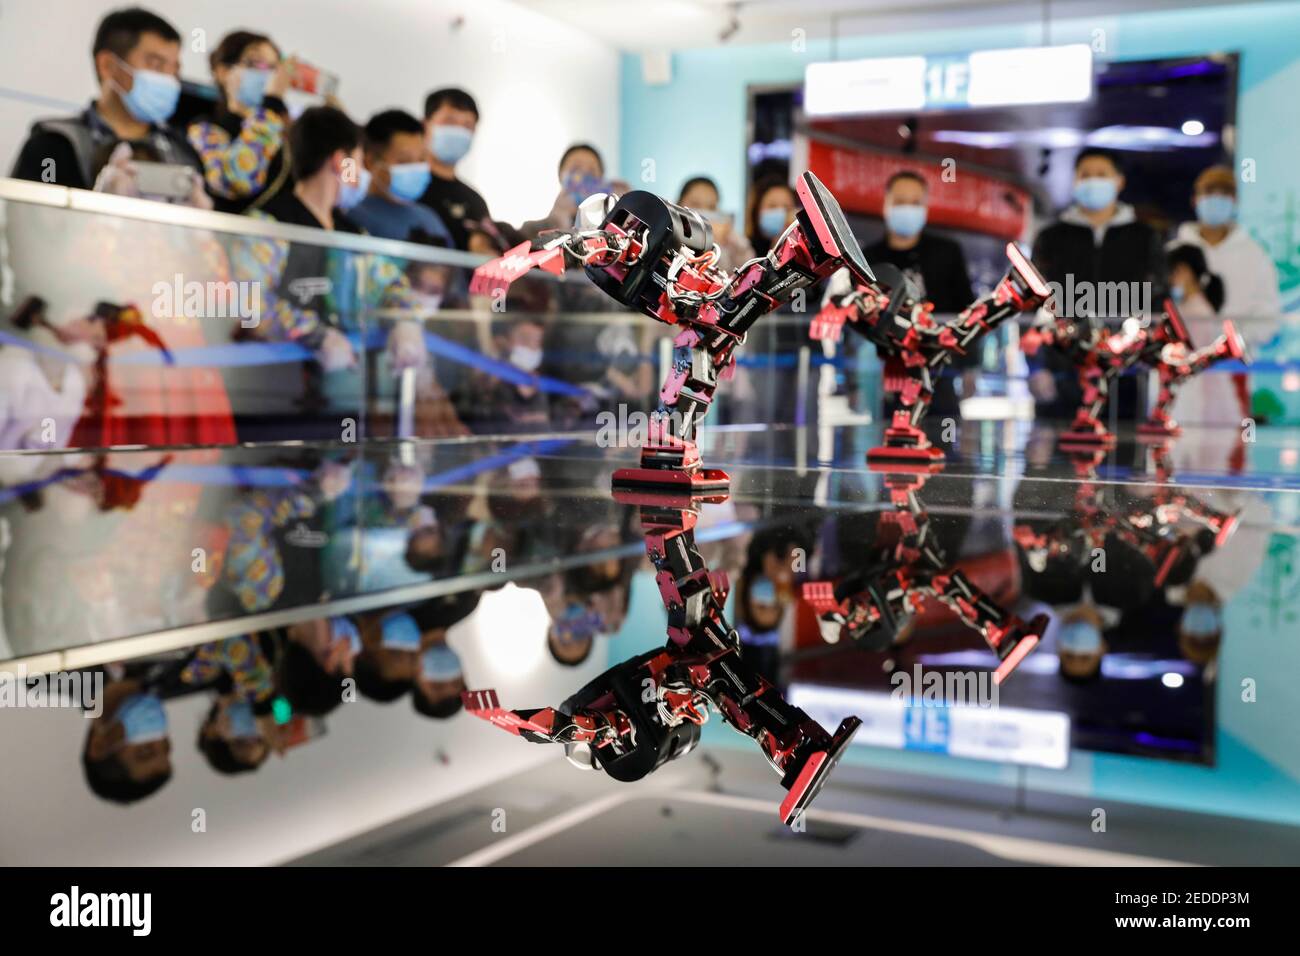 Beijing, China's Henan province. 14th Feb, 2021. Visitors view the performance of robots in Baofeng County, central China's Henan province, Feb. 14, 2021. Credit: He Wuchang/Xinhua/Alamy Live News Stock Photo